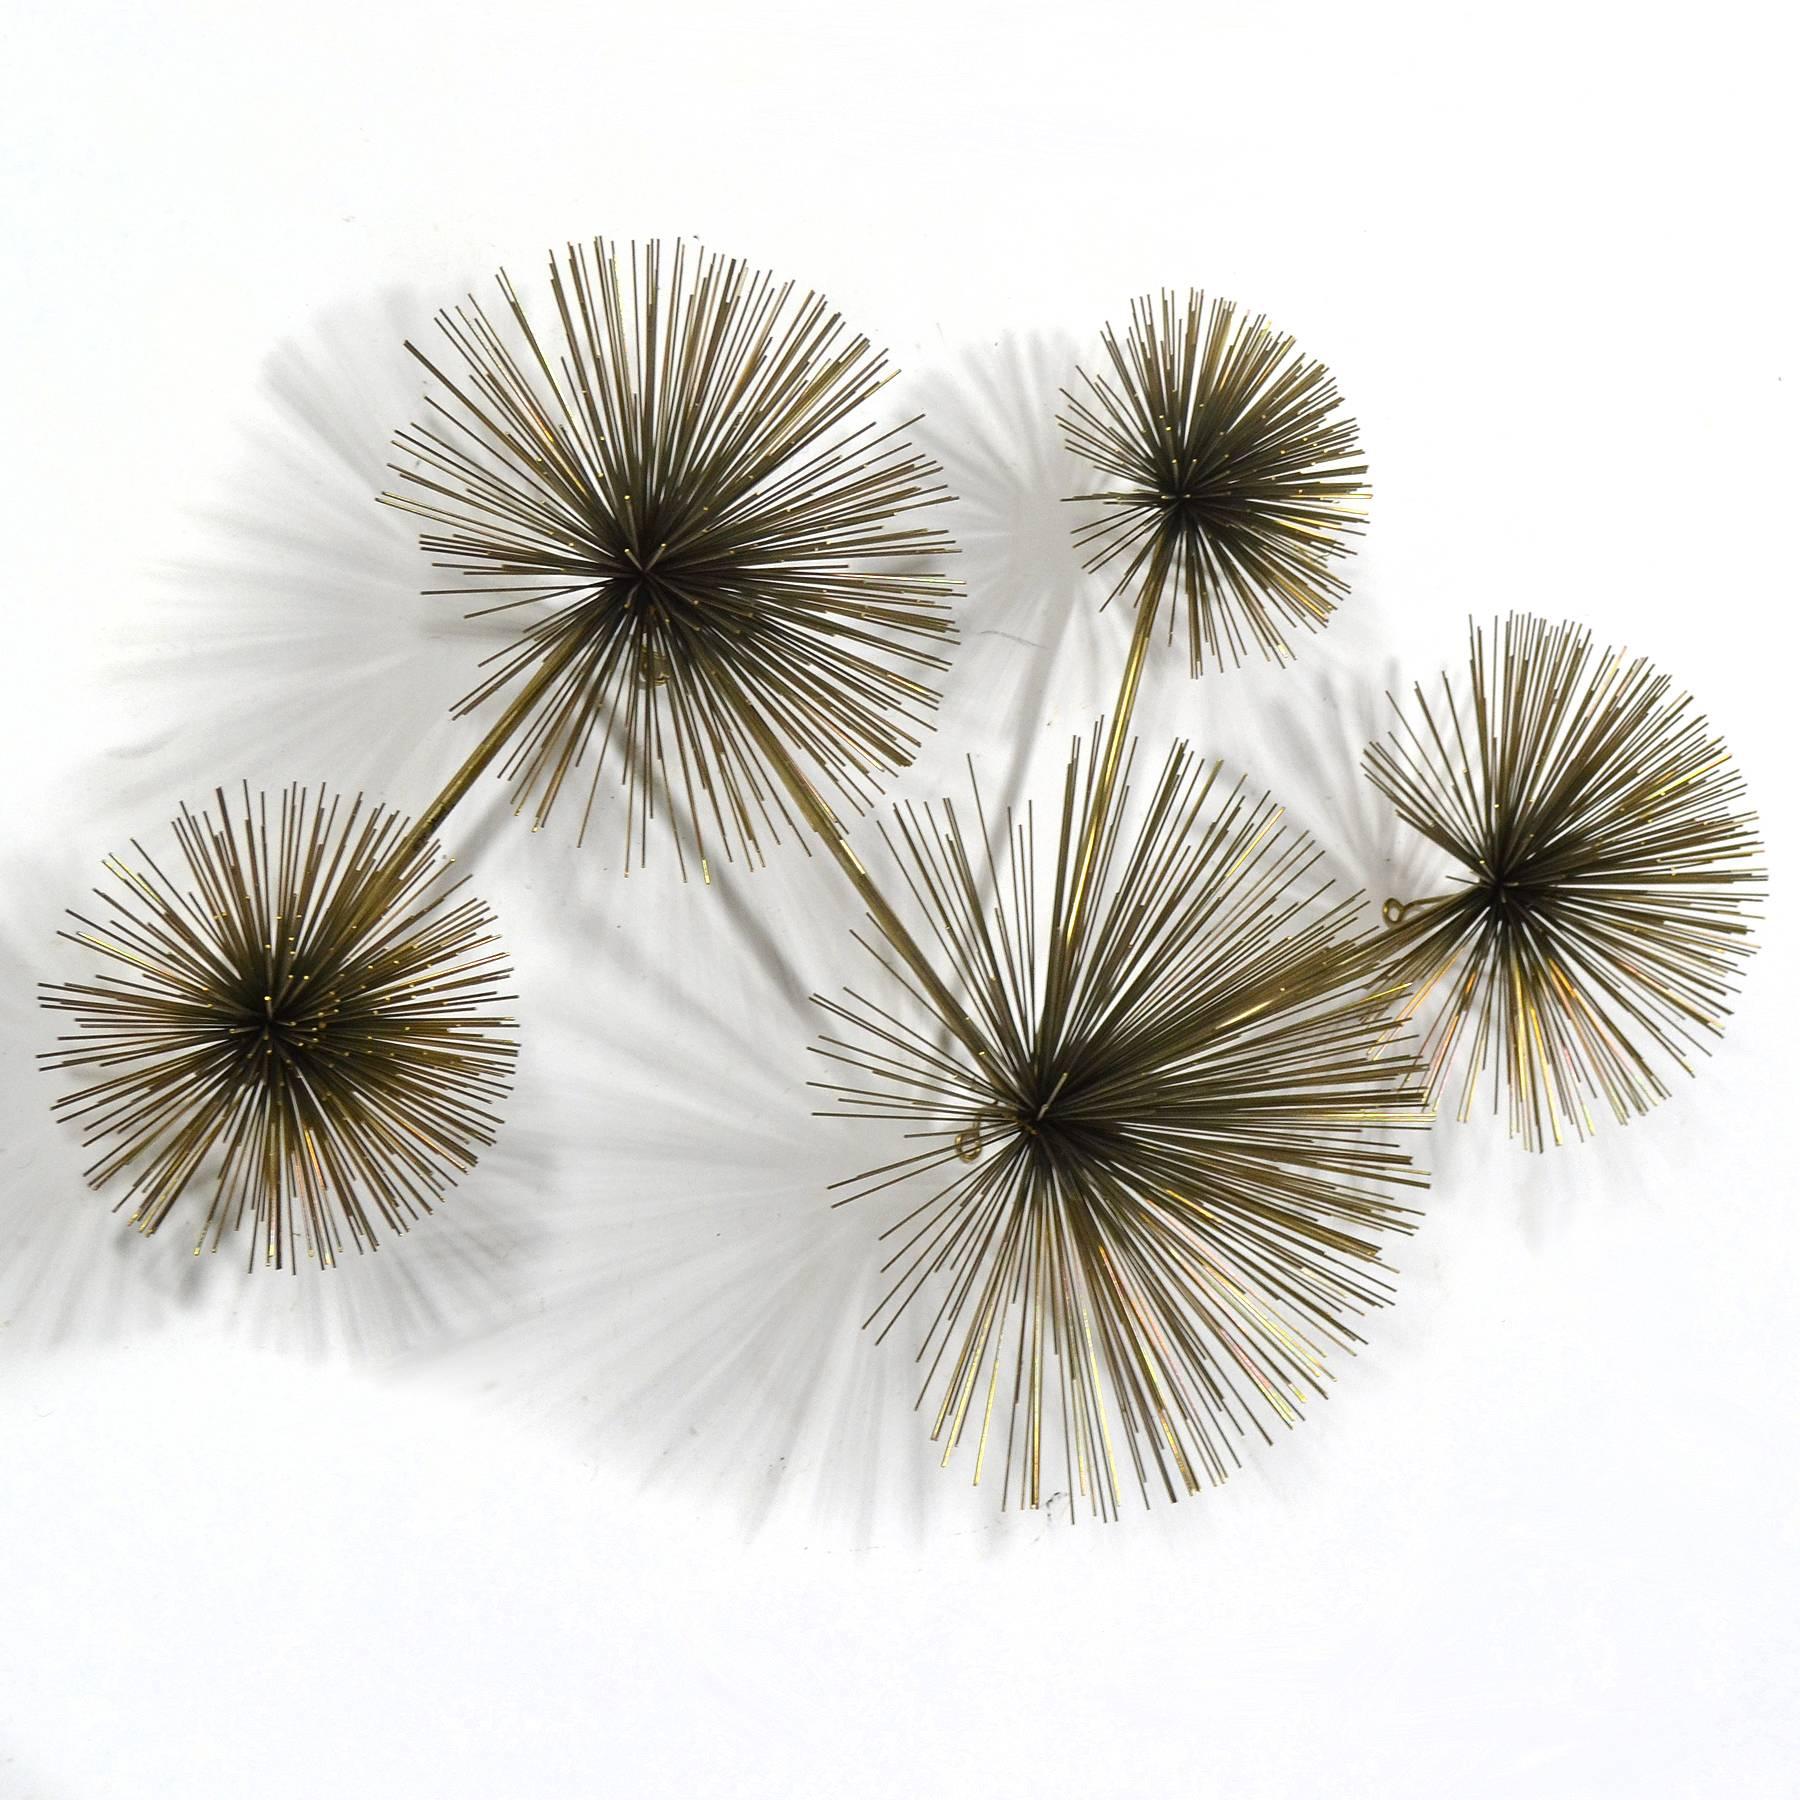 The Jere studio created a variety of designs using Bertoia's dandelion form as inspiration. This wall-mounted sculpture features a collection of five different sized bursts of radiating wire rods. A vibrant composition, it is equally attractive hung